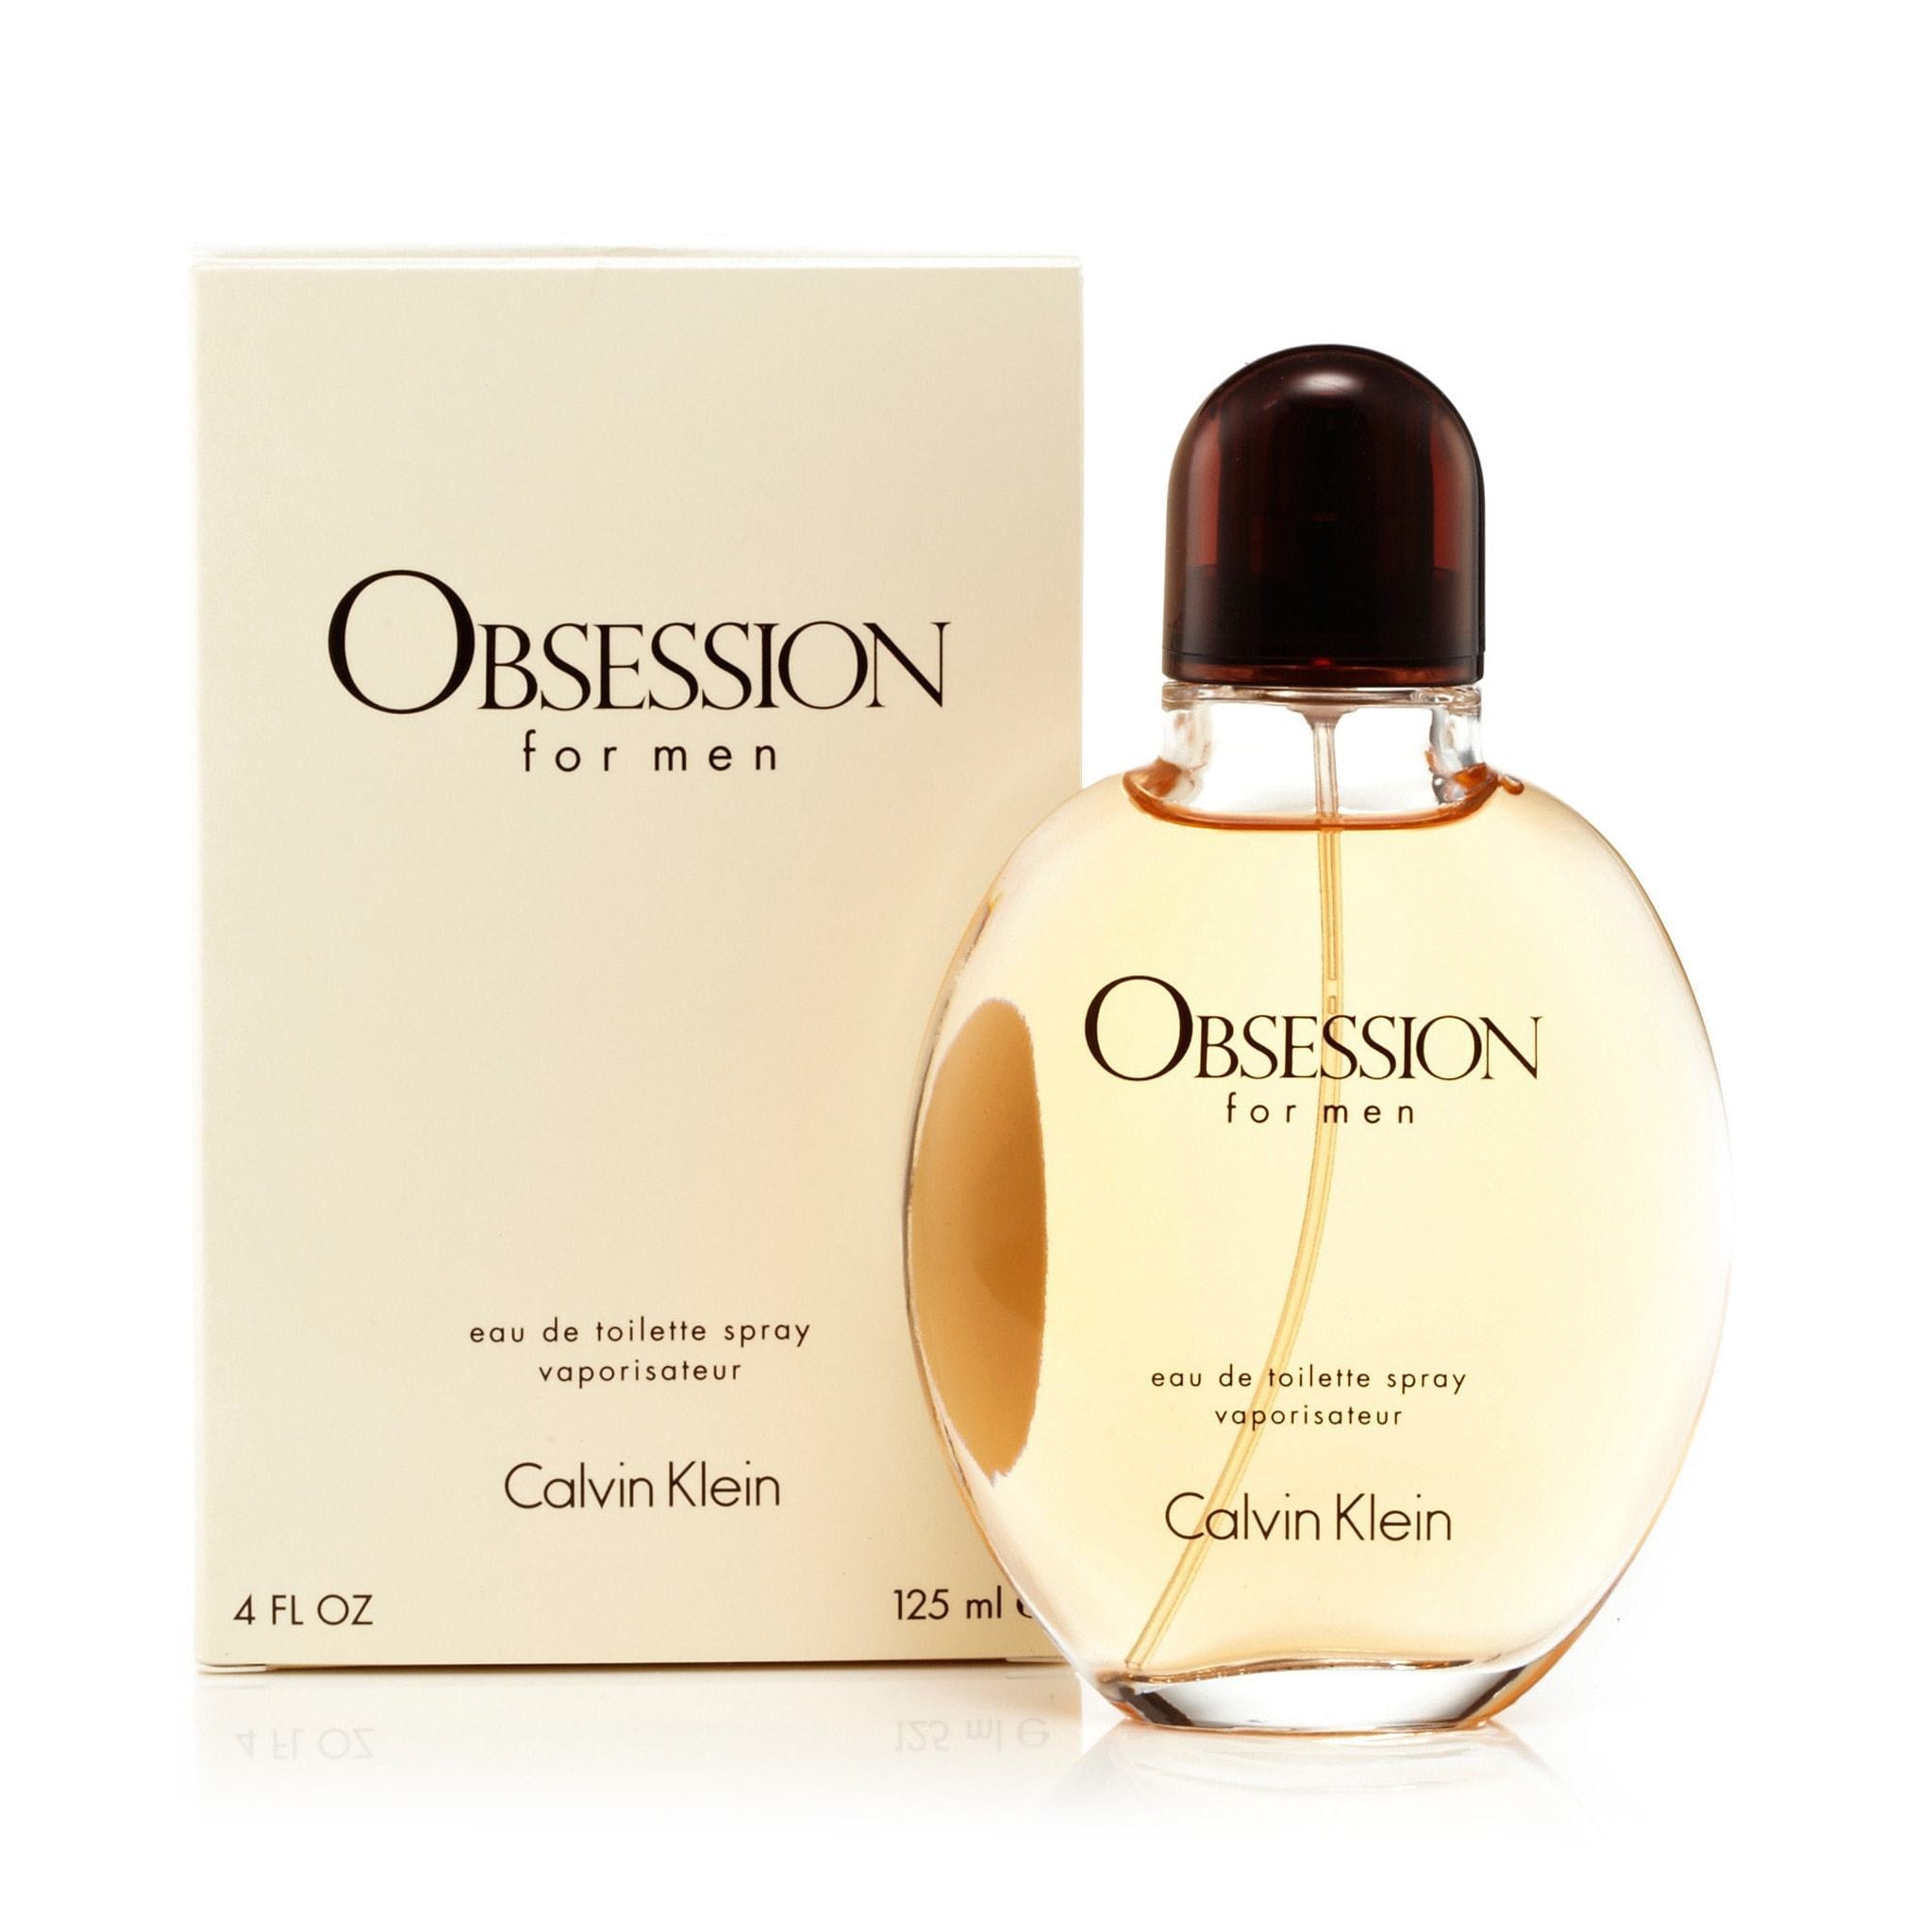 Calvin Klein Colognes, Perfumes & Beauty Products | Perfumania